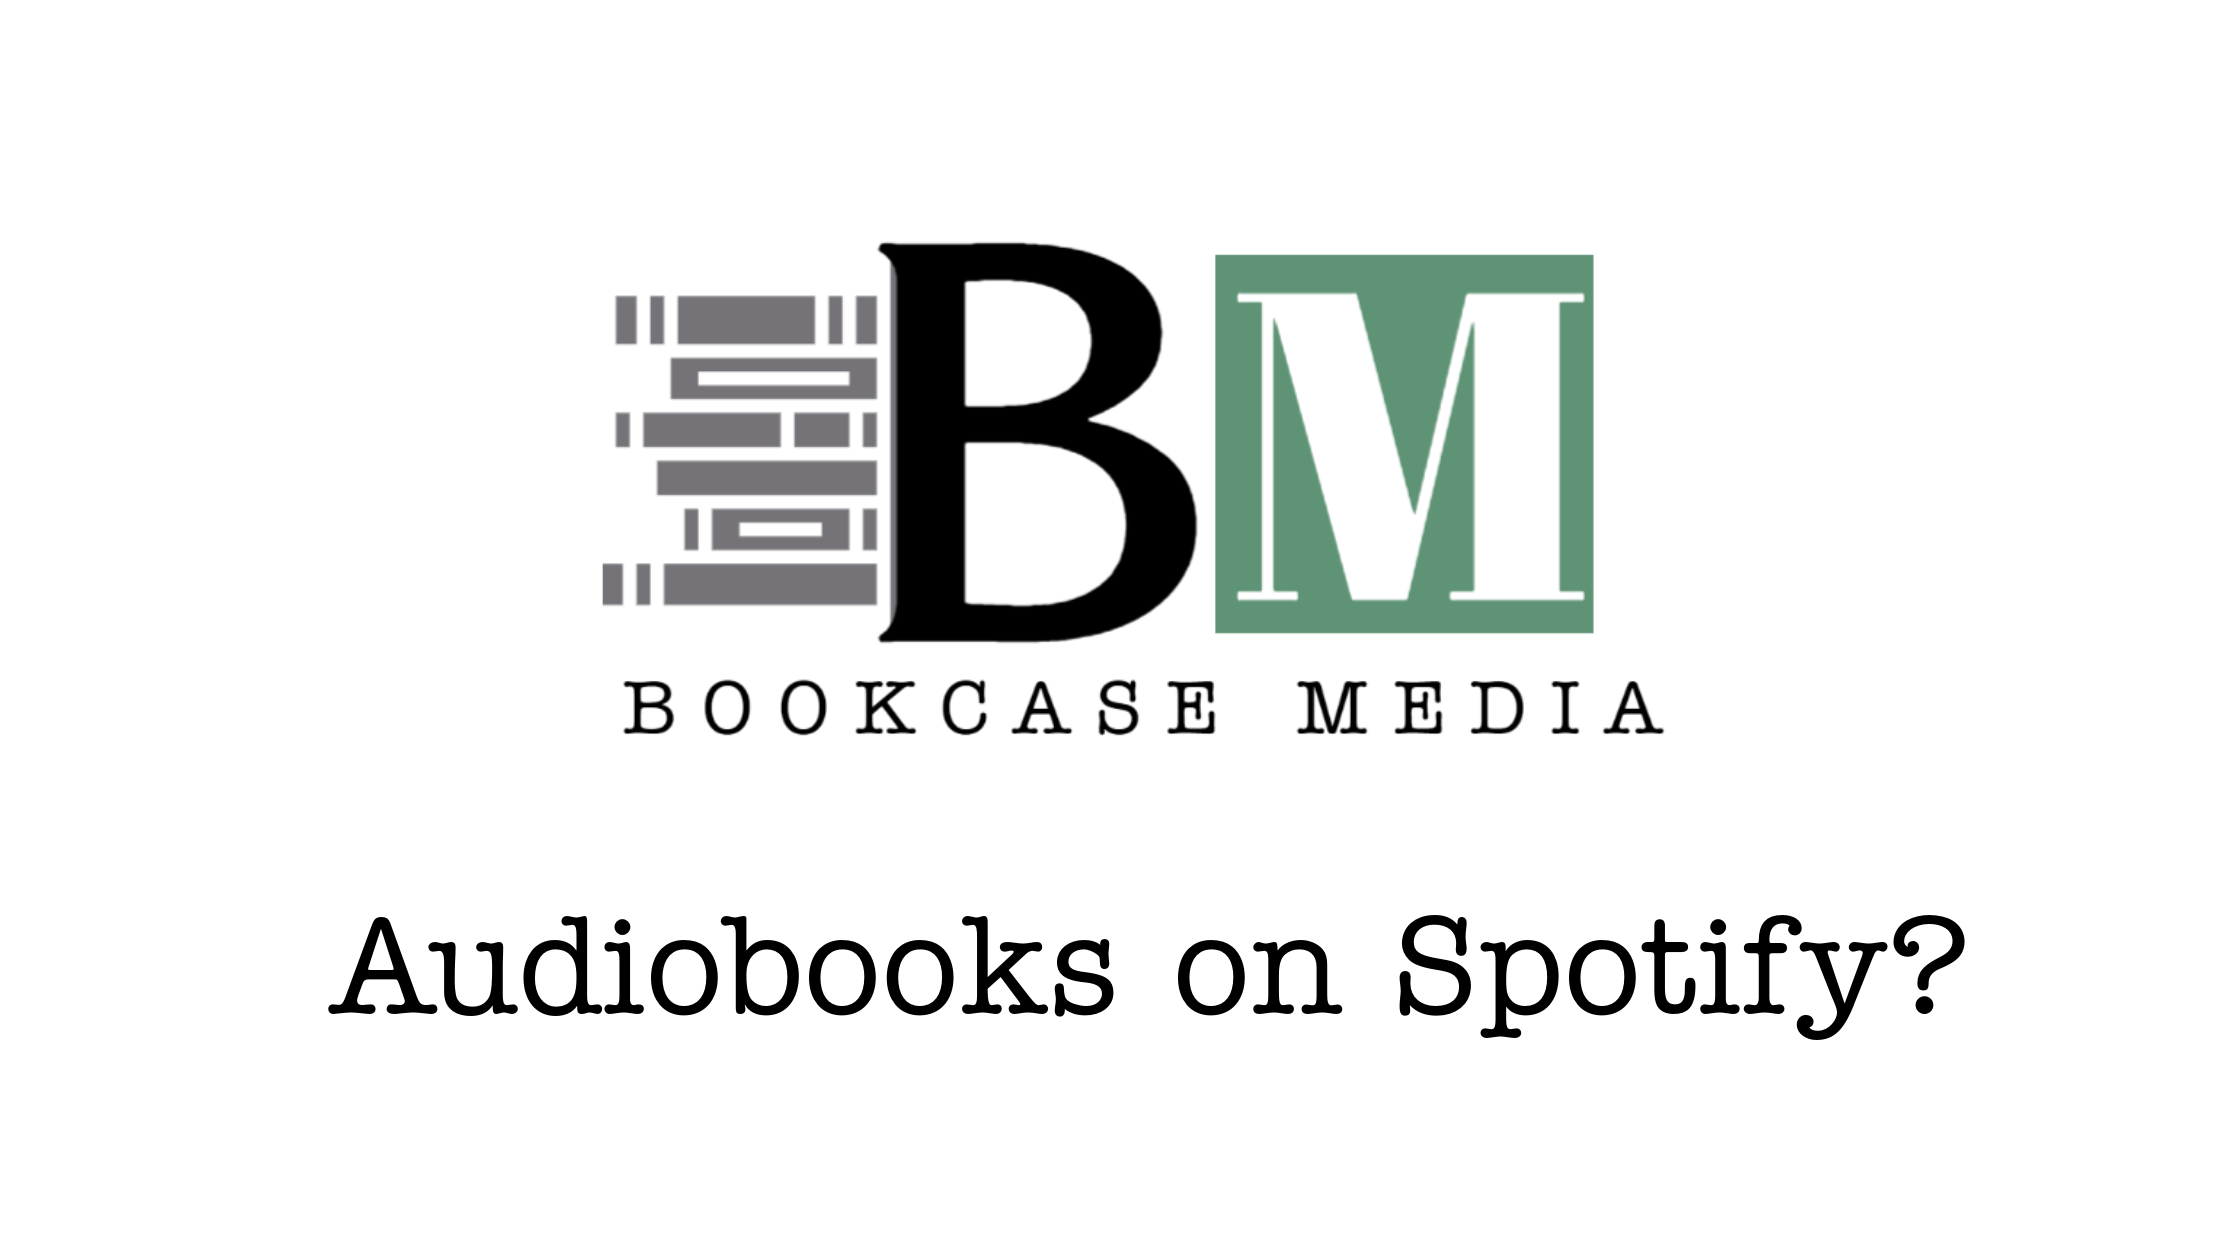 Do you have Audiobooks on Spotify?